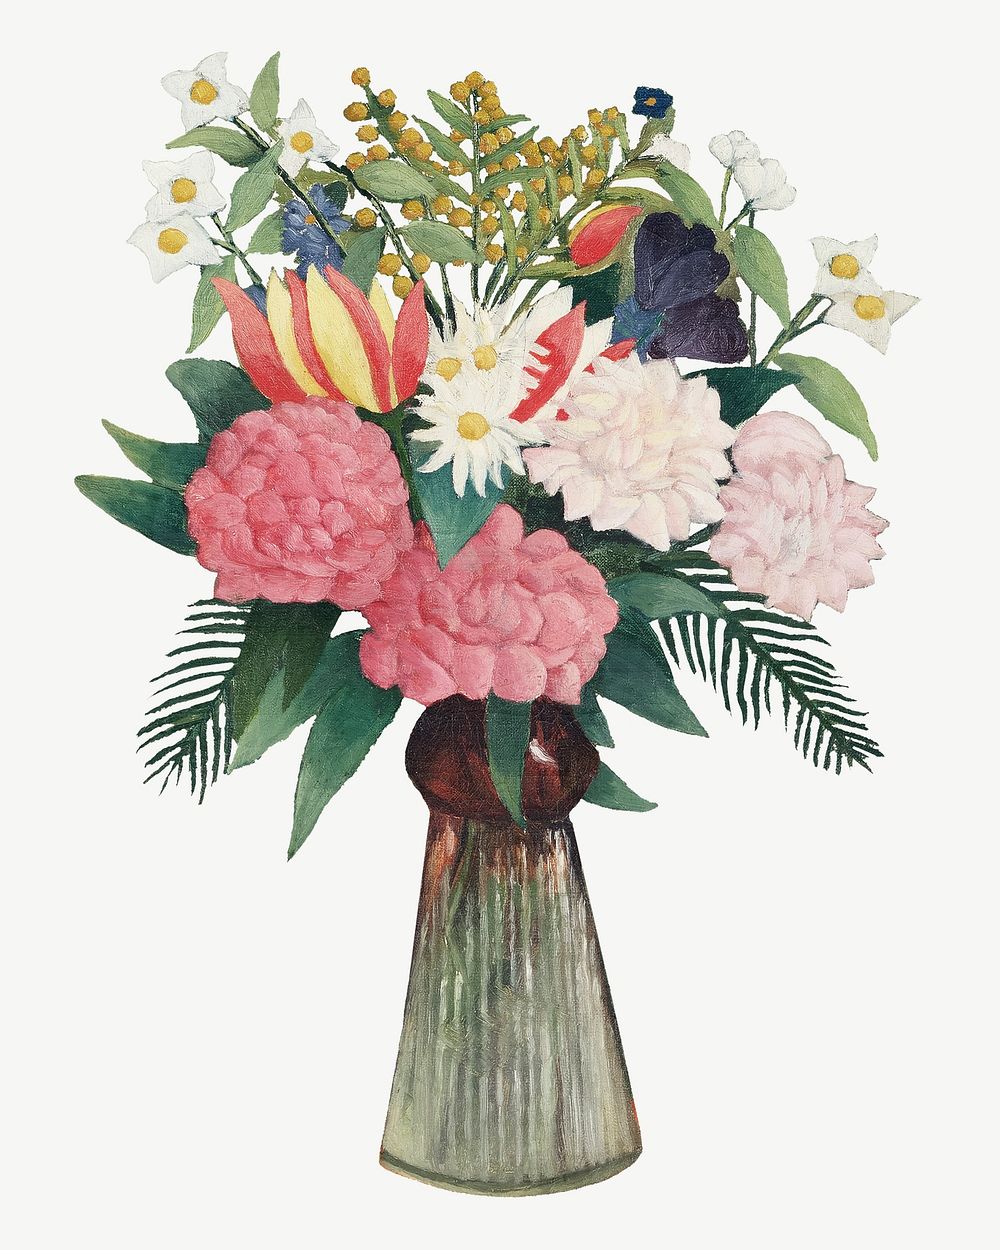 Henri Rousseau's Flowers in a Vase psd. Remixed by rawpixel.